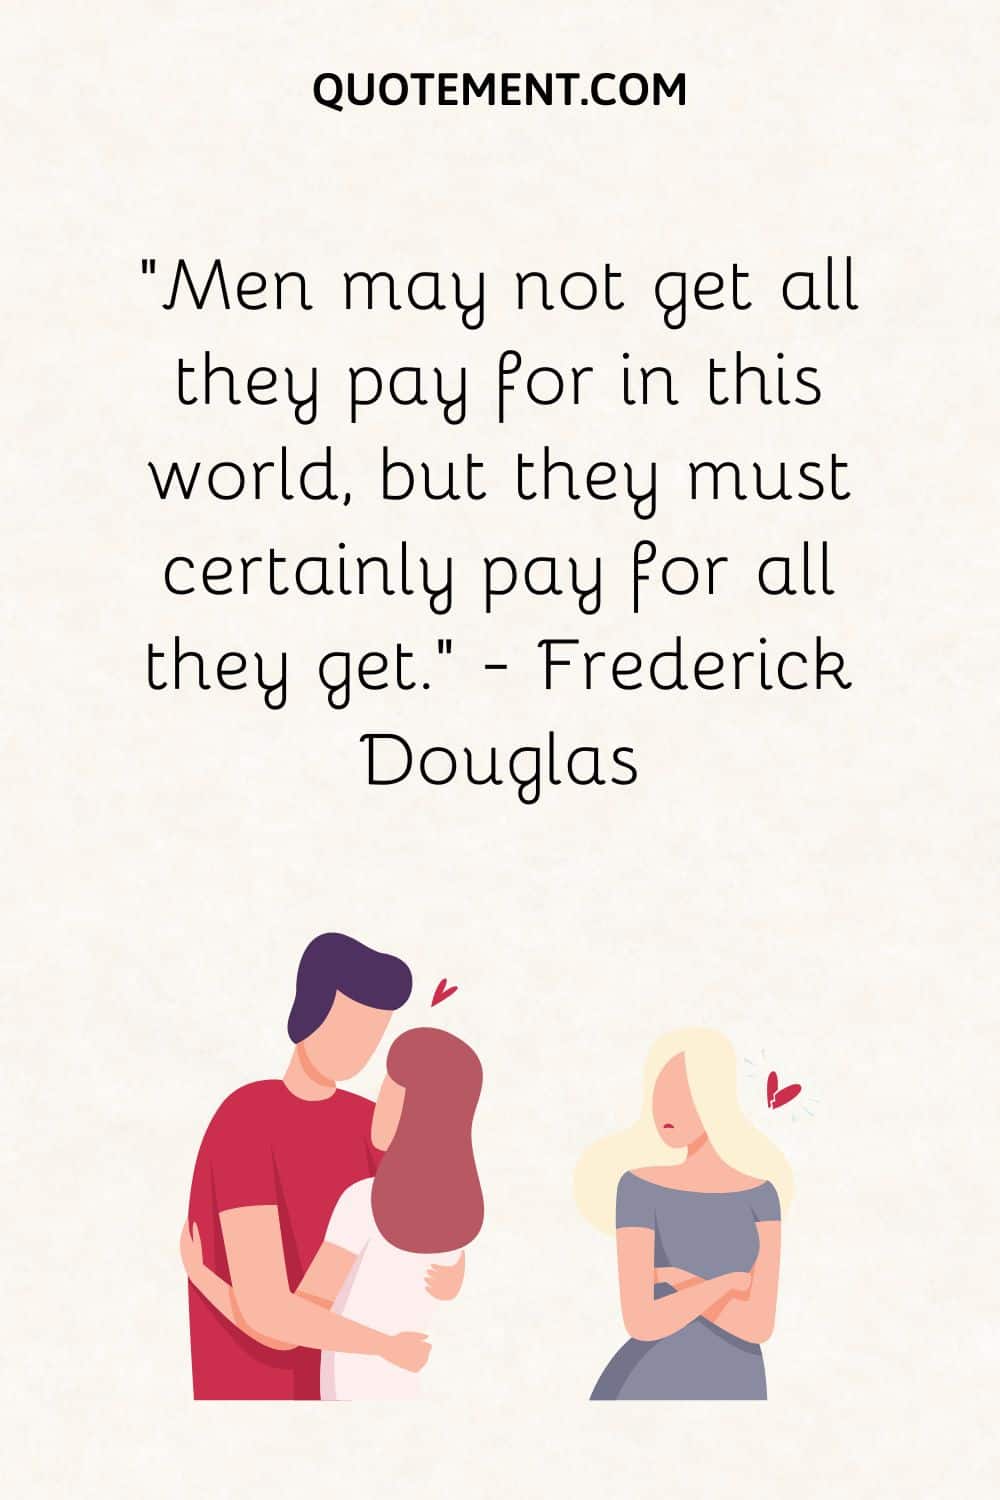 Men may not get all they pay for in this world